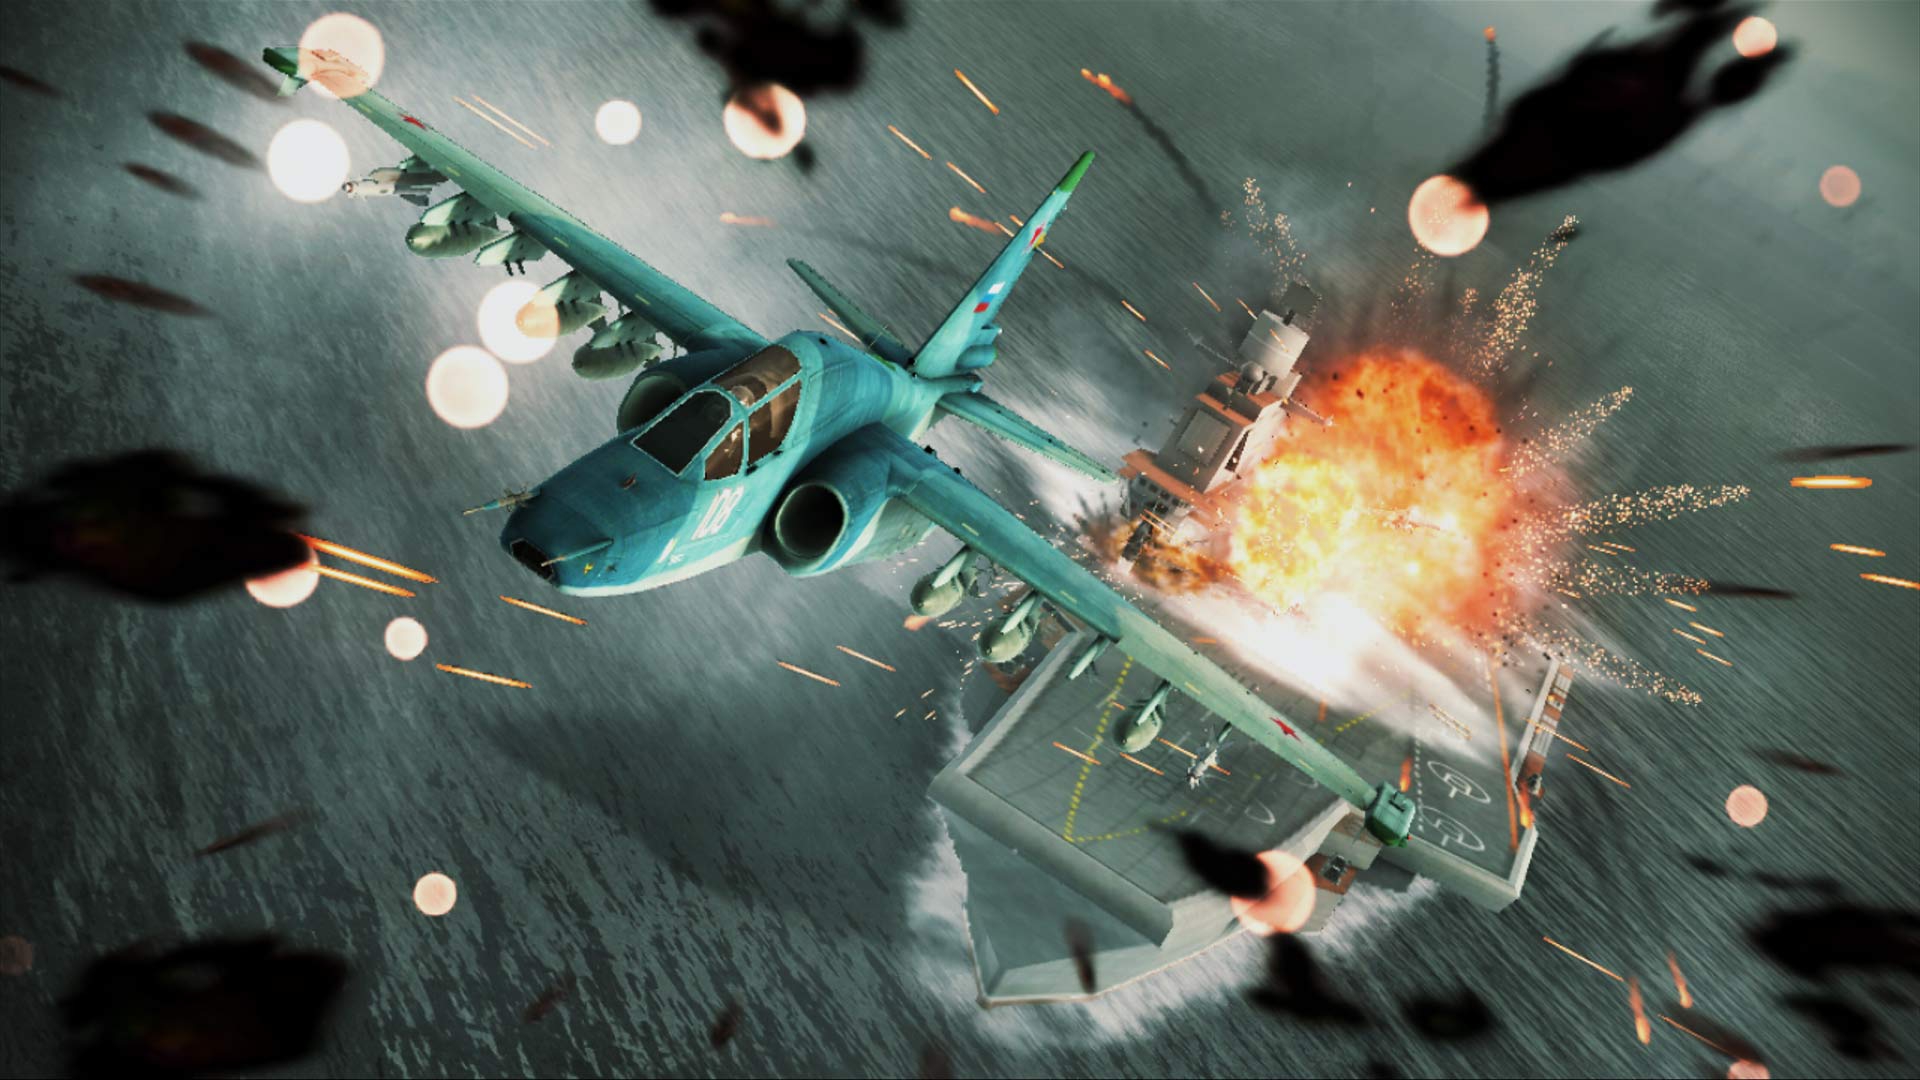 ace, Combat, Game, Jet, Airplane, Aircraft, Fighter, Plane, Military, Battle, Explosion, Fire, Ship, Boat, Carrier, Hg Wallpaper